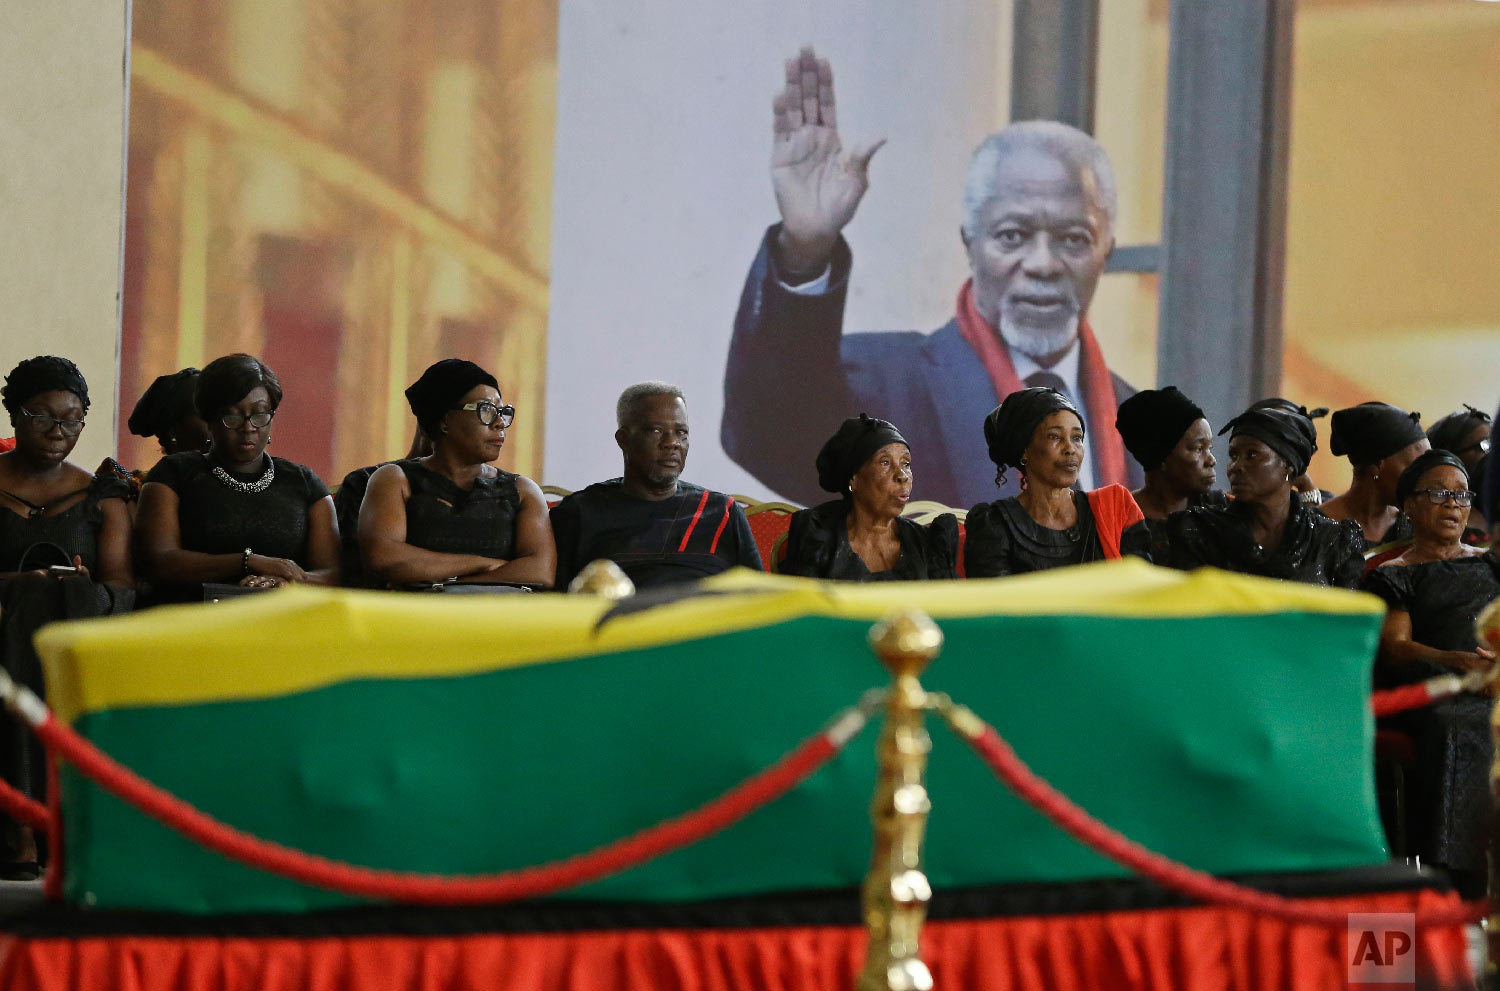  Mourners pay their respects at the coffin of former United Nations Secretary-General Kofi Annan at the Accra International Conference Center in Ghana on Sept. 11, 2018. Annan died in Switzerland at age 80. (AP Photo/Sunday Alamba) 